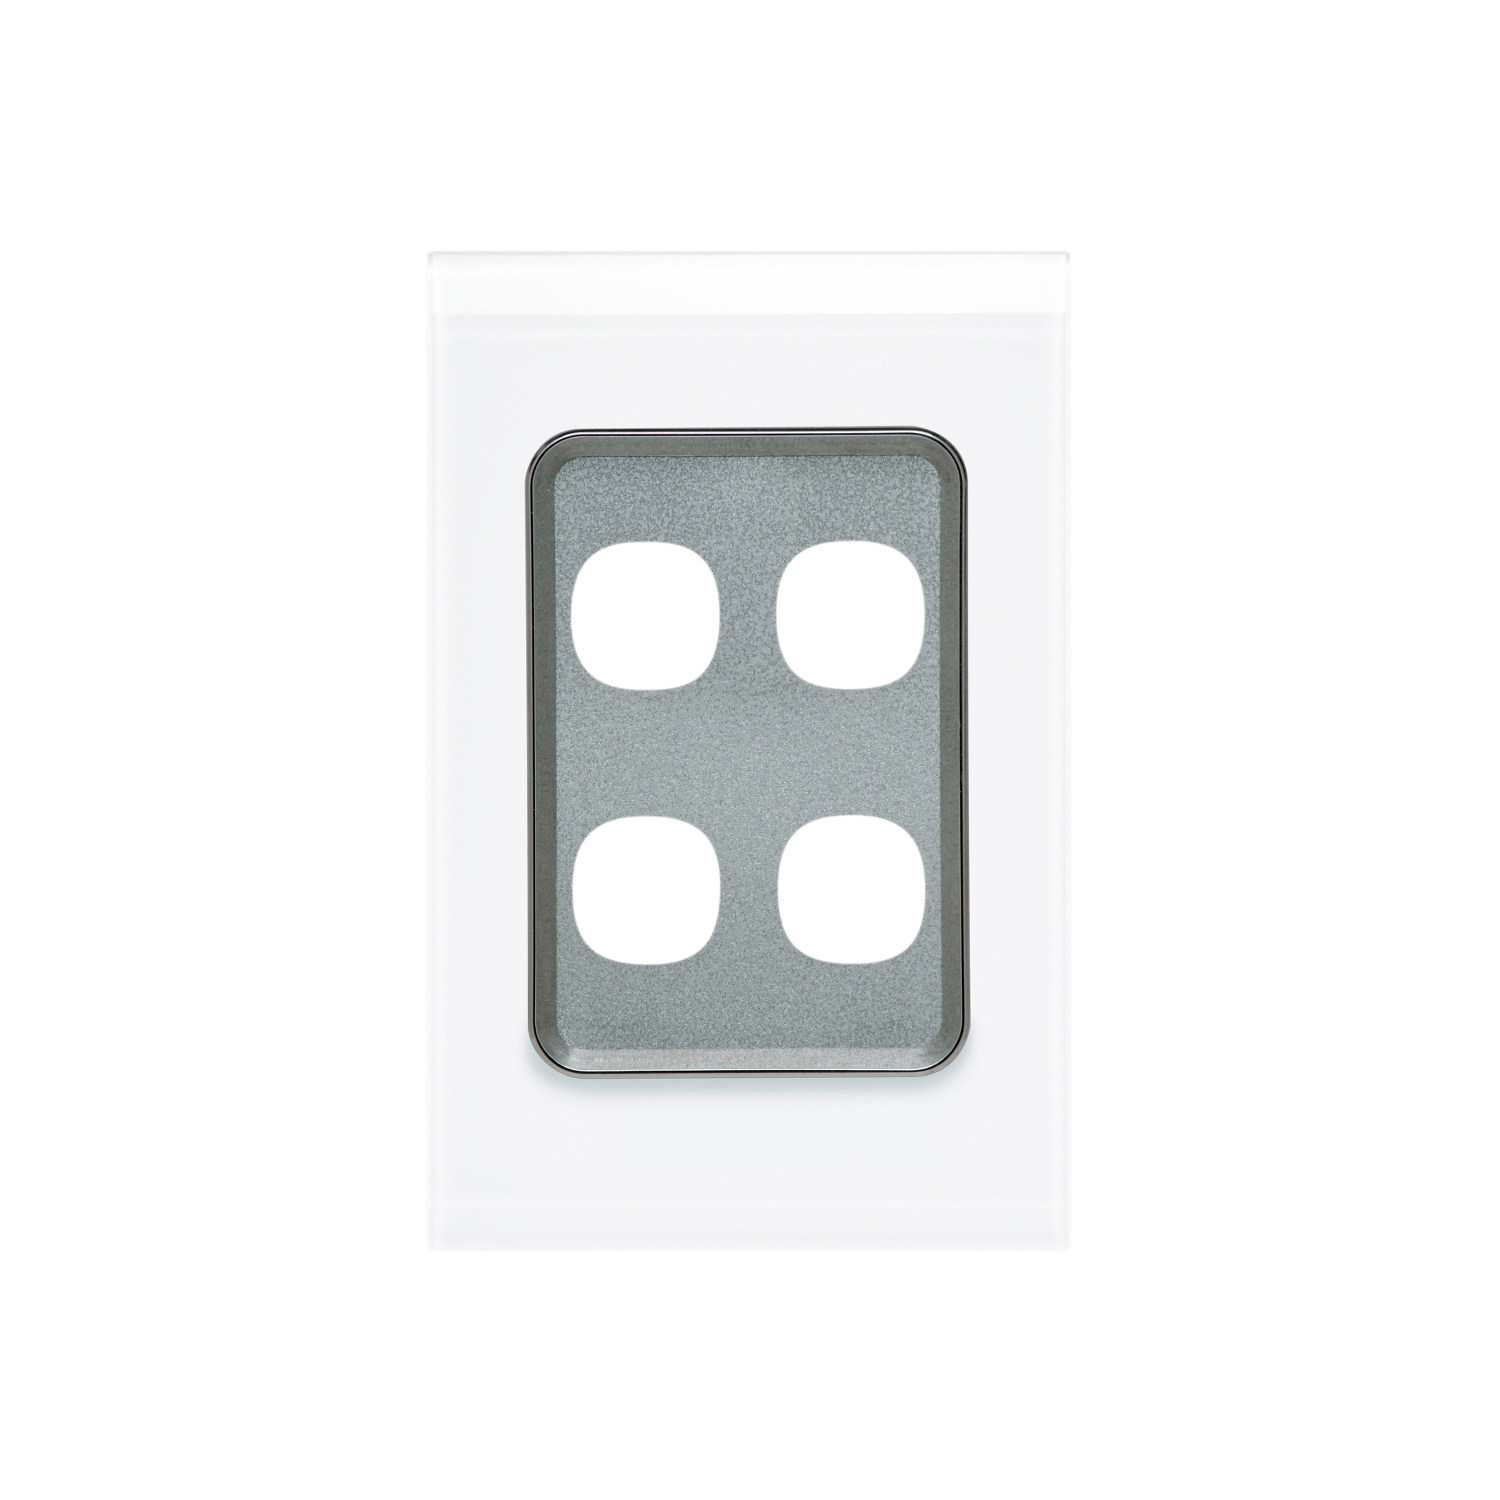 Switch Grid Plates and Covers, 4 Gang, Less Mechanisms